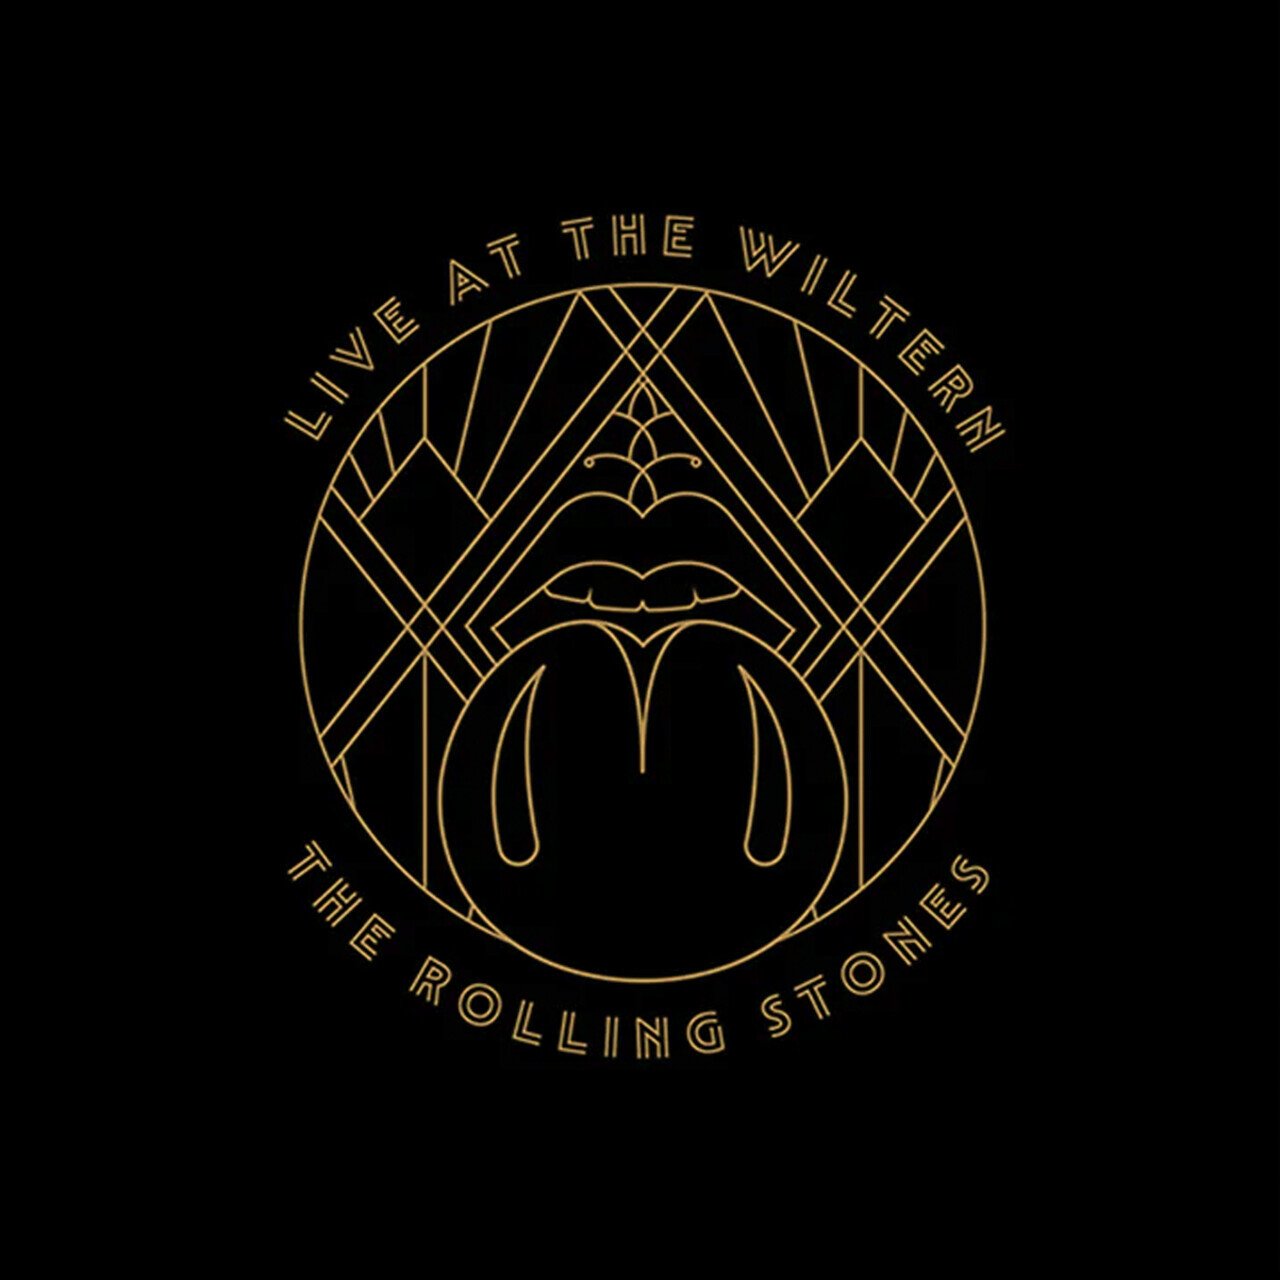 Рок Universal (Aus) Rolling Stones, The - Live At The Wiltern (Black Vinyl 3LP) рок decca pop [gb] rolling stones the out of our heads uk version